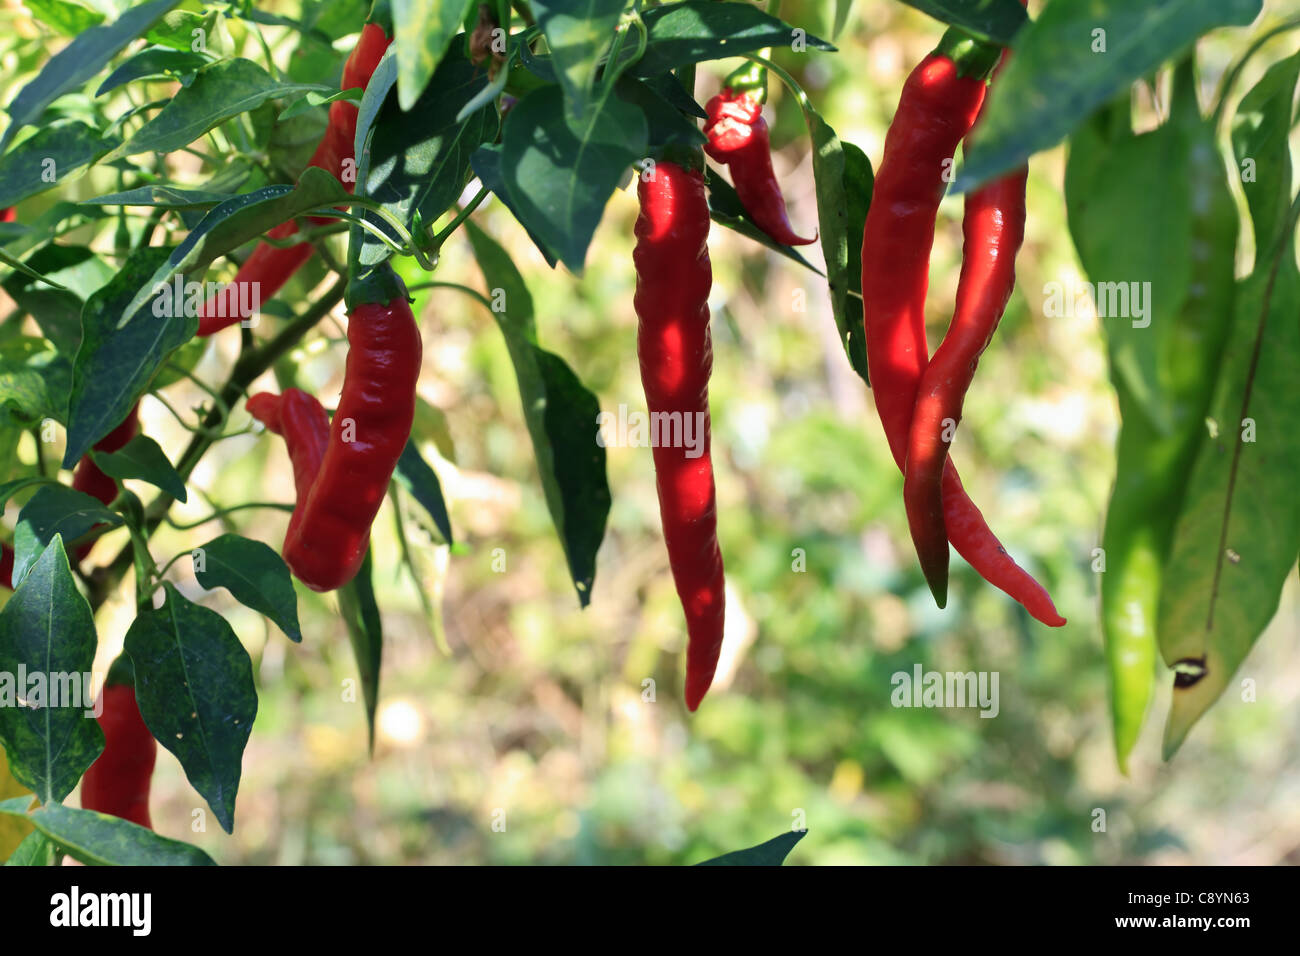 ripe chili peppers hang on a plant outdoor Stock Photo